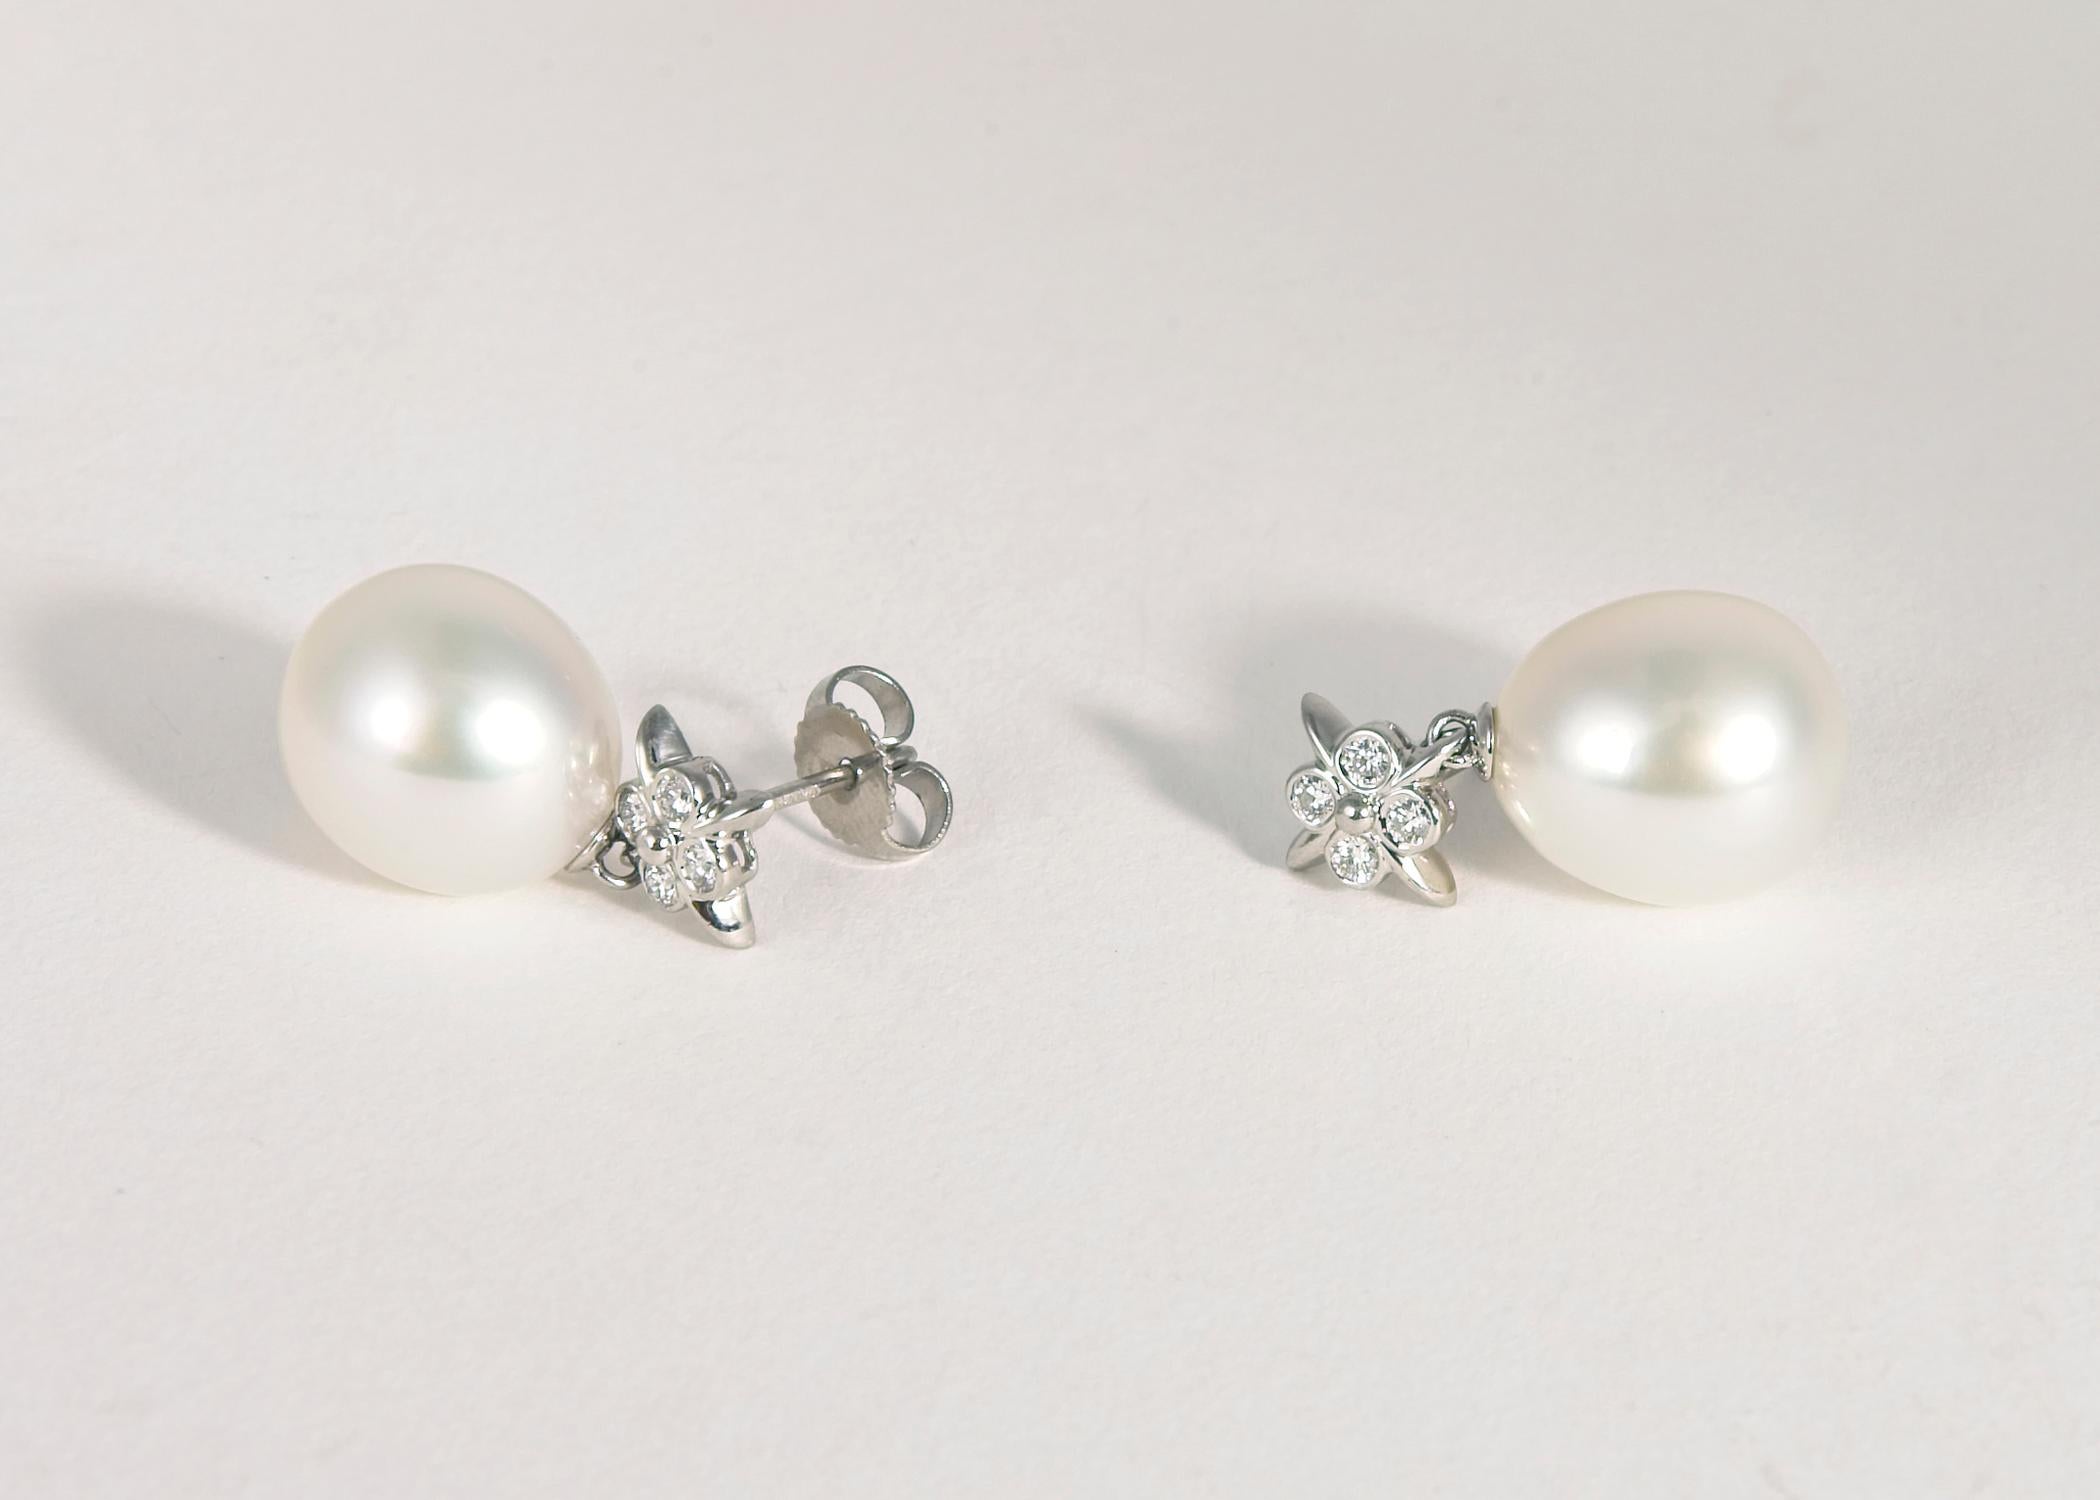 A Tiffany Classic. A matched pair of South Sea pearls ( 13.3 x 11.9mm ) is combined with the purity of platinum and finished with eight brilliant cut diamonds. Approximately 1 inch in length. Simply elegant !!!